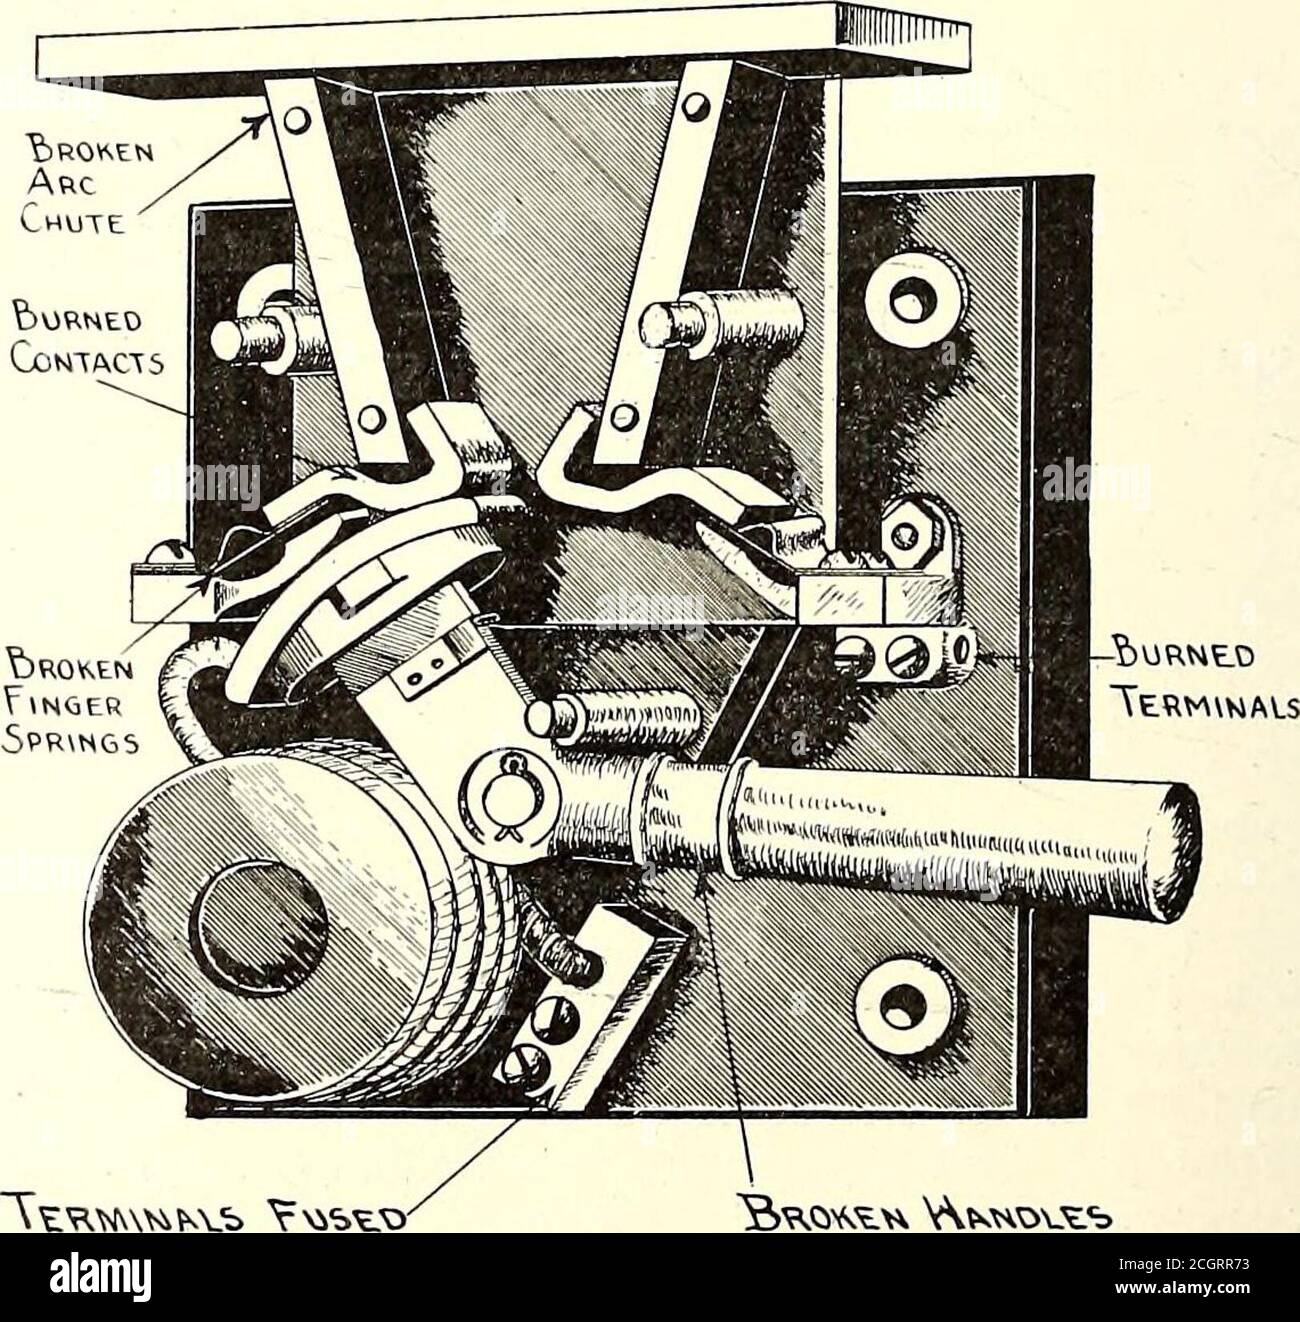 . Electric railway journal . erves both purposes. TERMINALS Terminals are of several different types. Some con-sist of brass or copper lugs with holes to receive thewires which are clamped in place by means of setscrews; others consist of a finished plate or lug towhich a cast terminal is bolted either by means of athrough bolt or a cap screw, the connecting wire beingsoldered into the cast terminal. Of these classes thelatter gives the least trouble. Troubles at terminalsgenerally arise from the working loose of connections.If the connections become very loose, the consequentarcing will burn Stock Photo